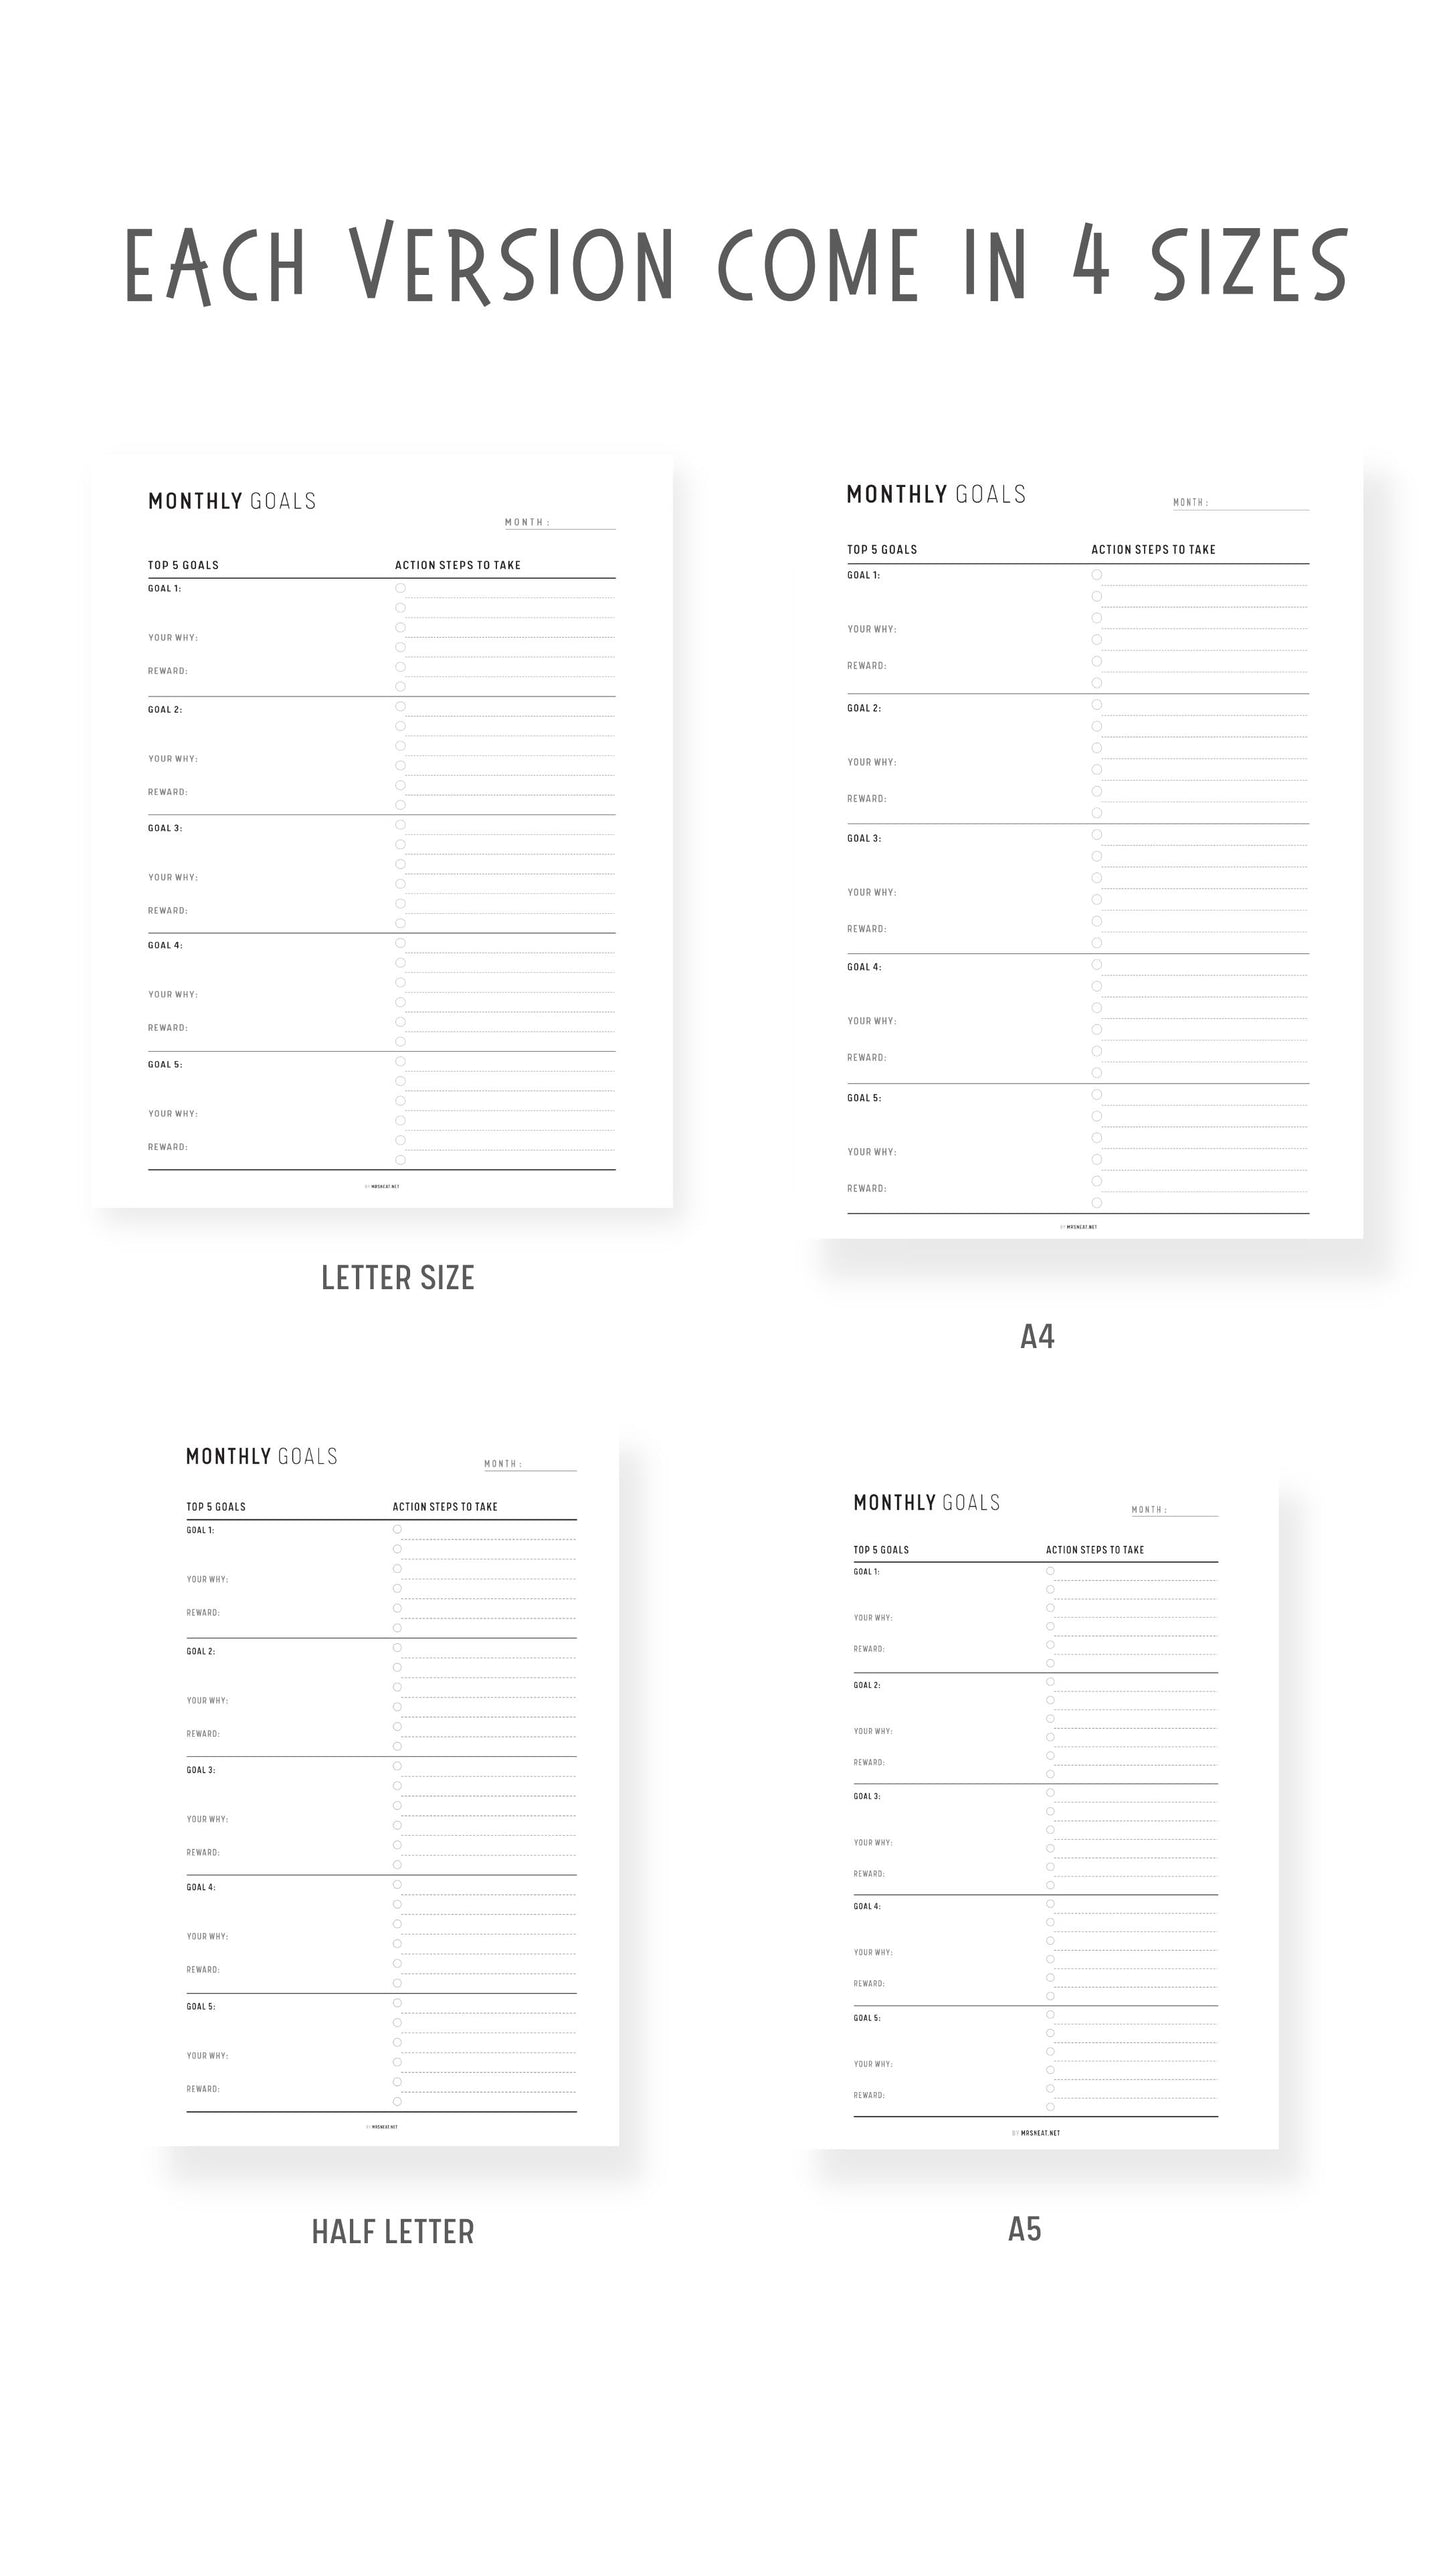 Top 5 Yearly, Quarterly, Monthly, Weekly Goals Planner Printable, Goal Setting, Goal Planning, Productivity Planner, A4/a5/letter/half, Digital Planner, Minimalist Goal Planner